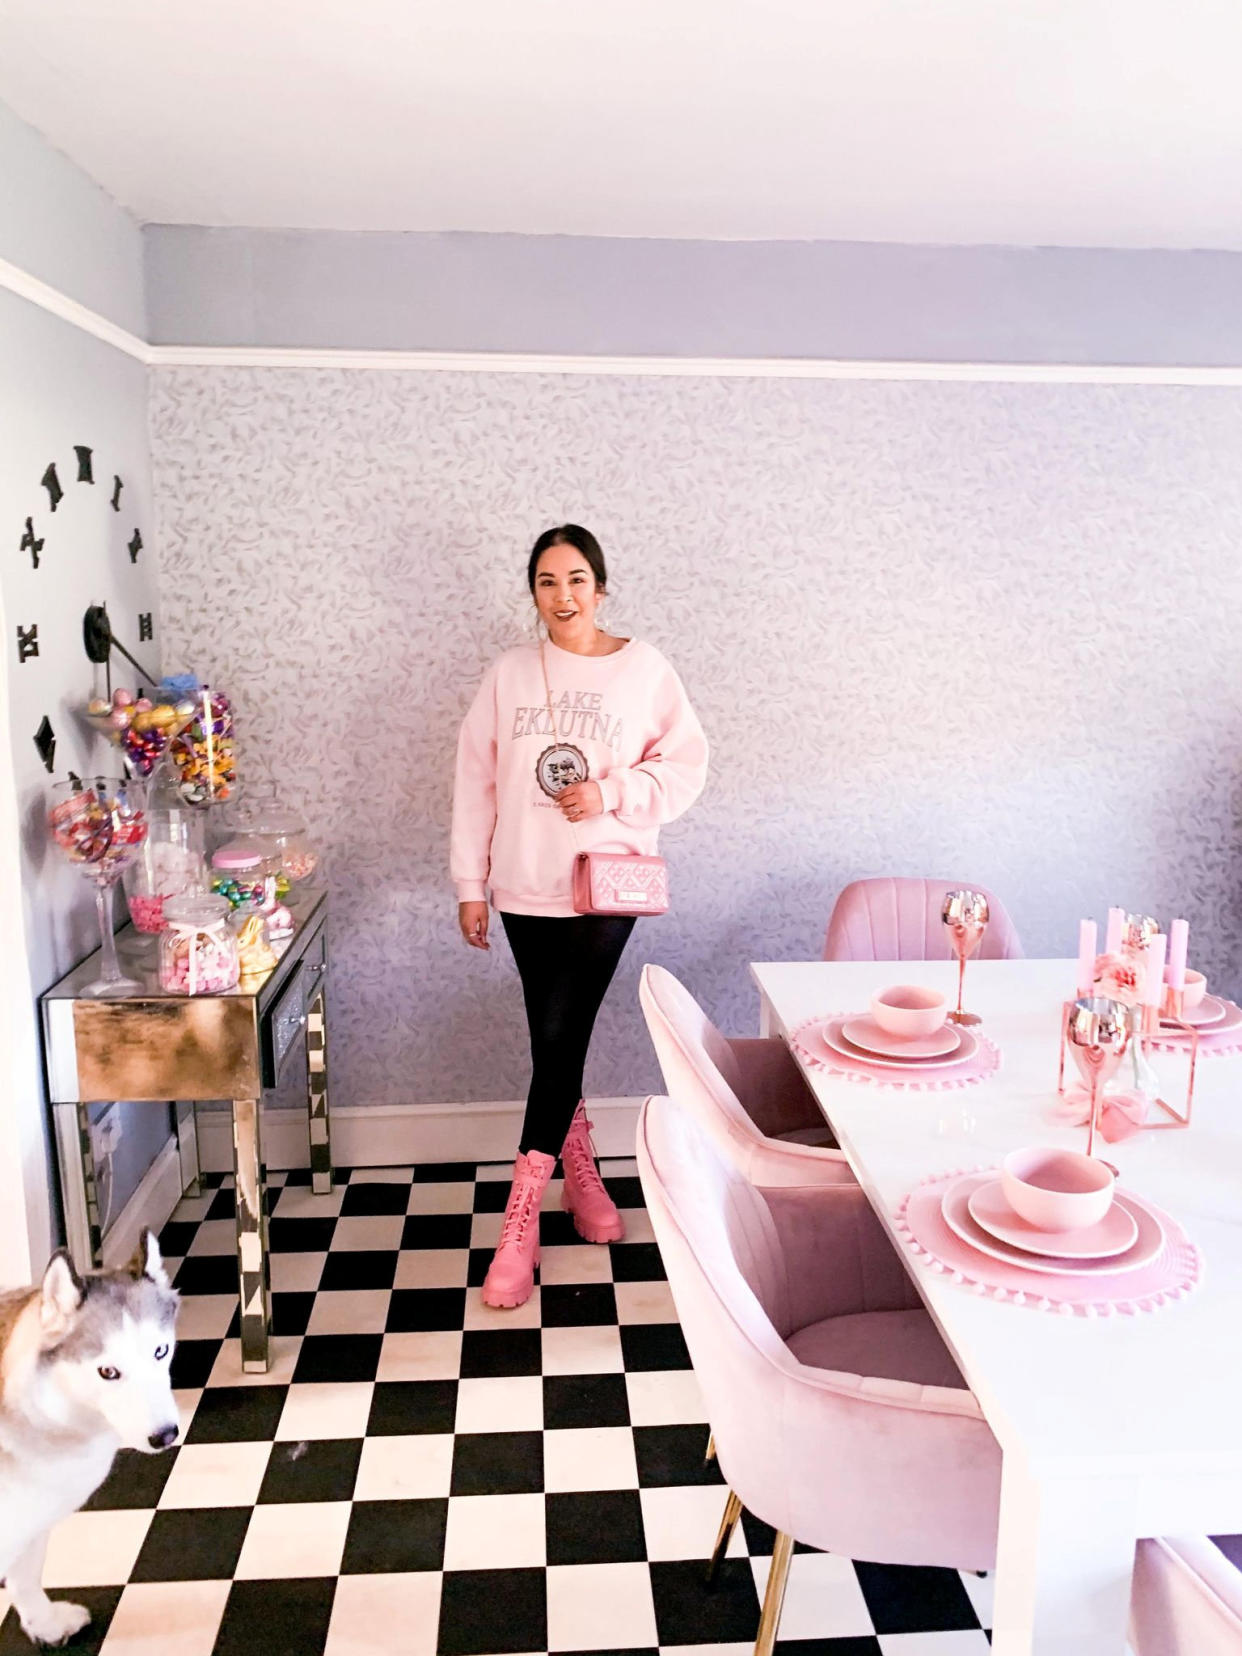 The pink-obsessed woman began her colour coordinated journey when her Stepdad, Michael Heslop, 64, gifted her a pink kettle and toaster at her engagement party in May 2019.